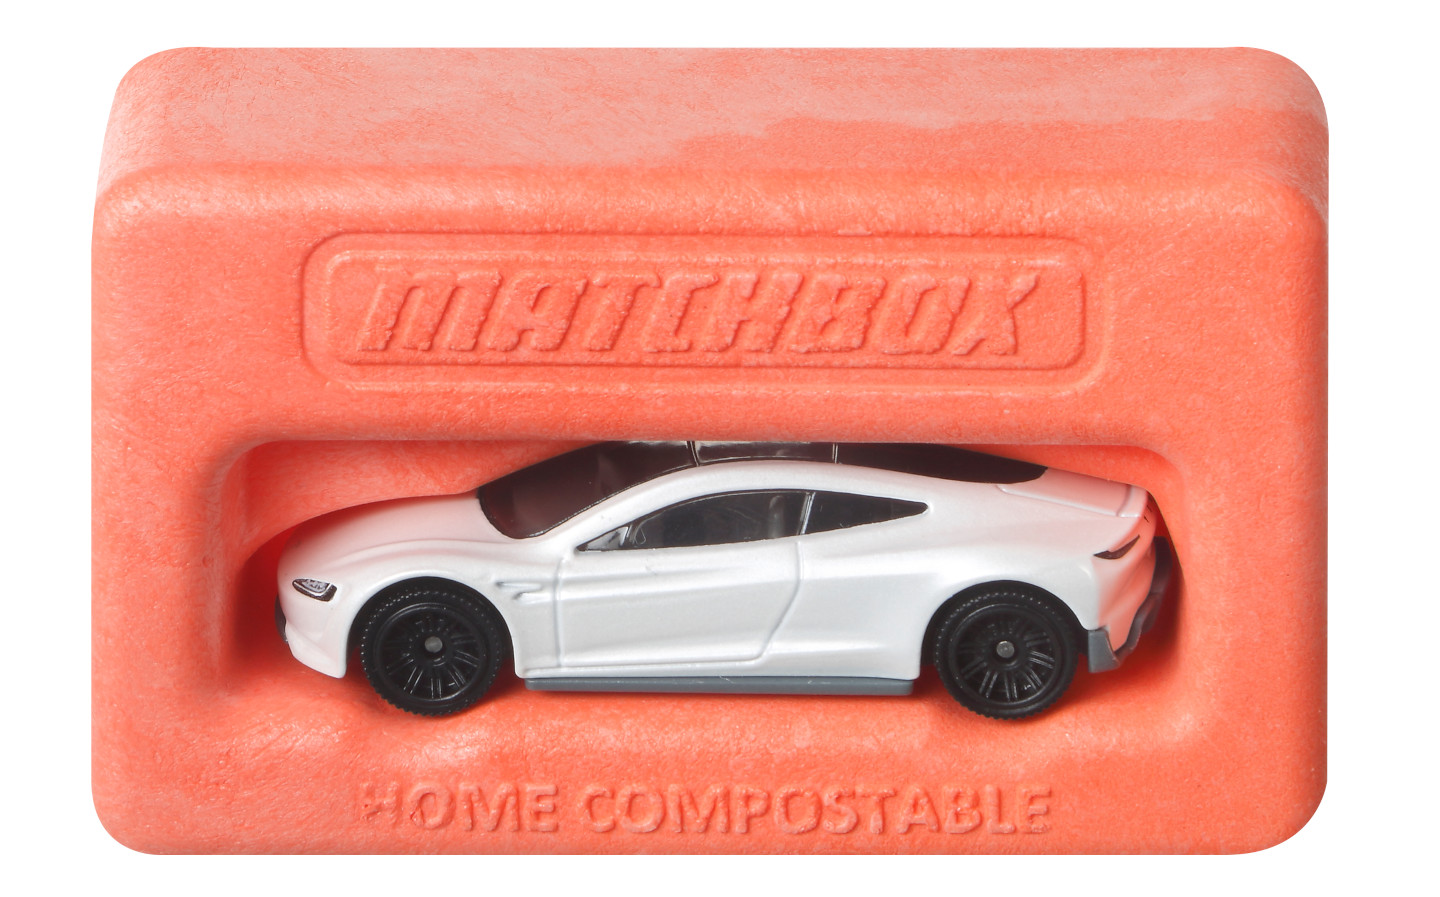 Matchbox relaunches in UK with model of 250mph, 0-60mph in 1.8 secs Tesla Roadster